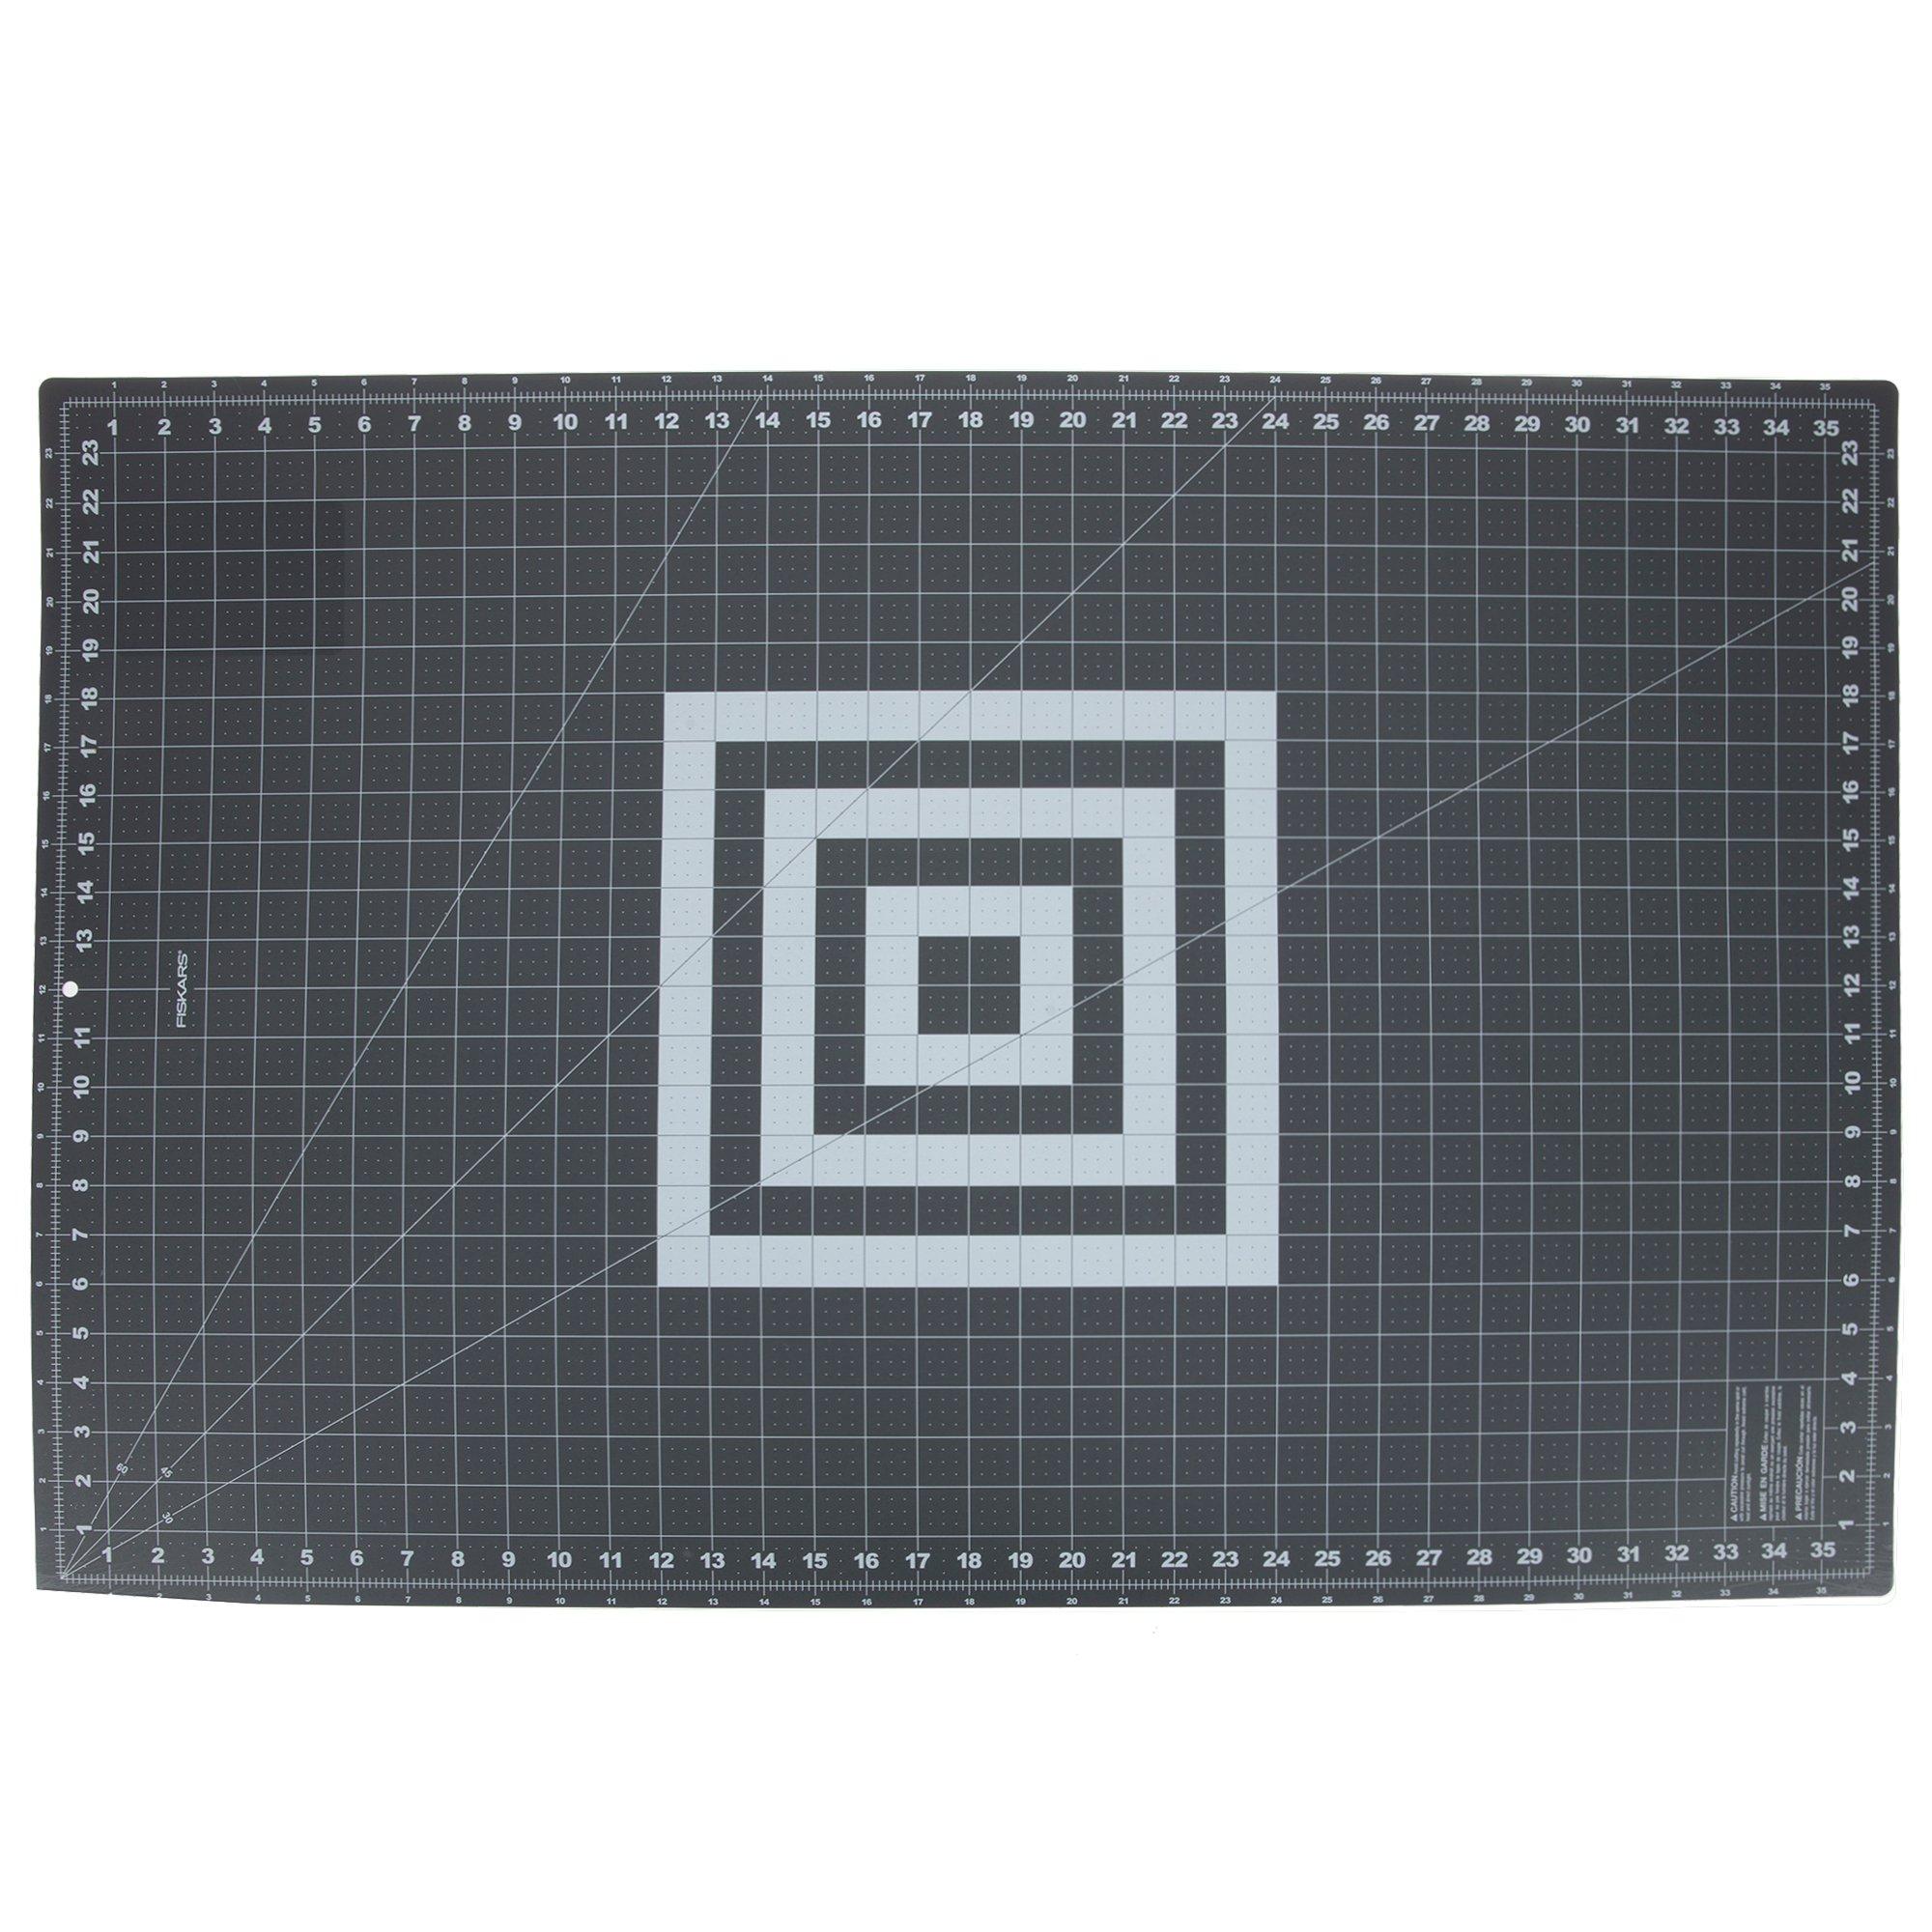 WORKLION Self Healing Cutting Mat: 24 x 36 inch Large Double Sided